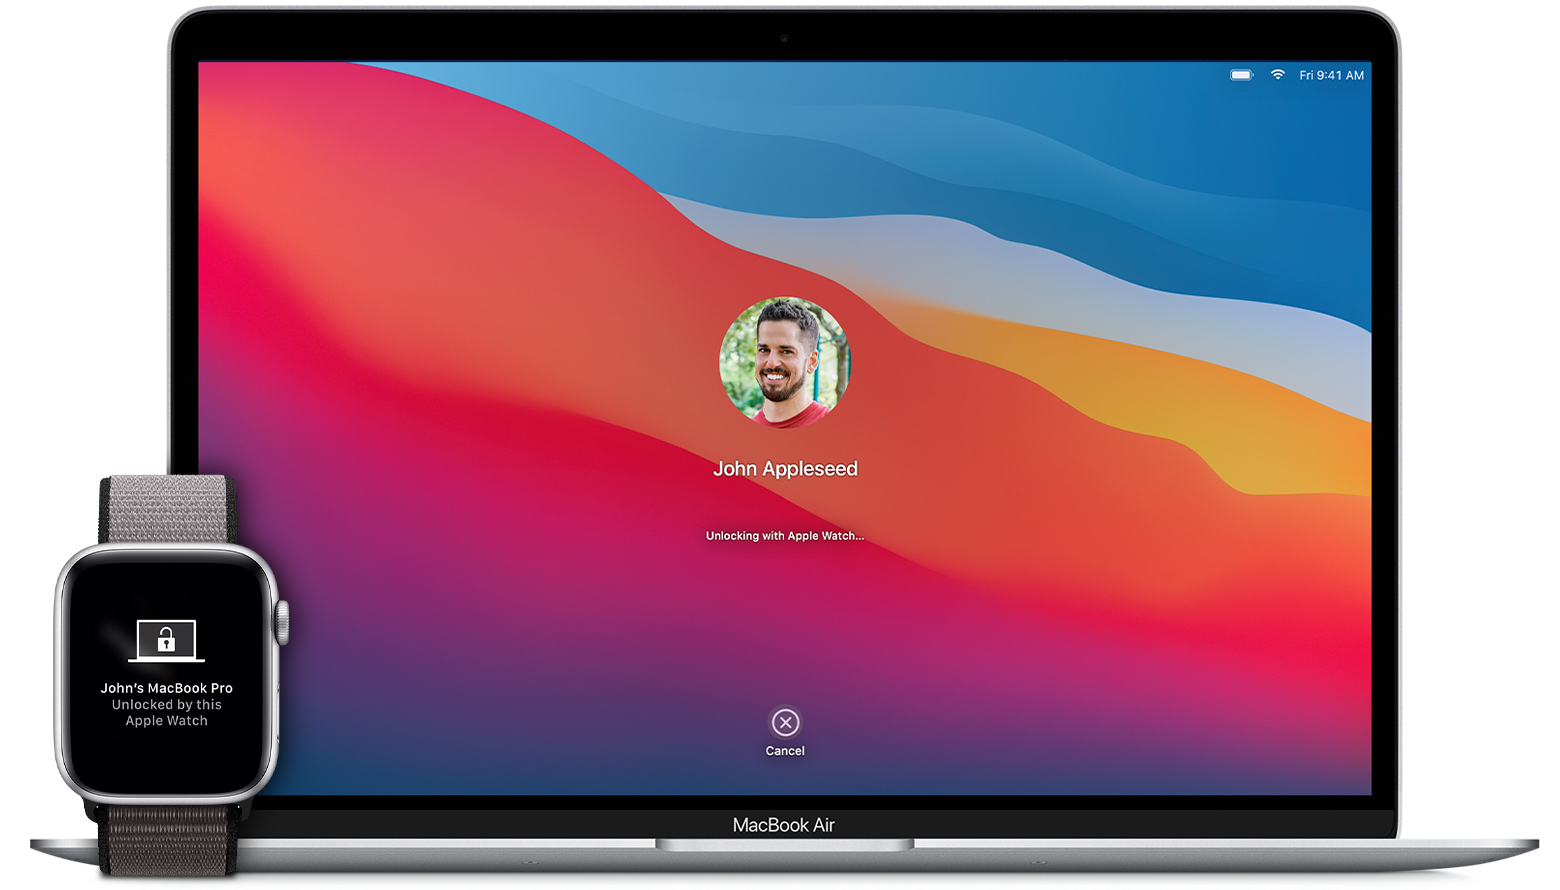 how to unlock macbook air with apple watch